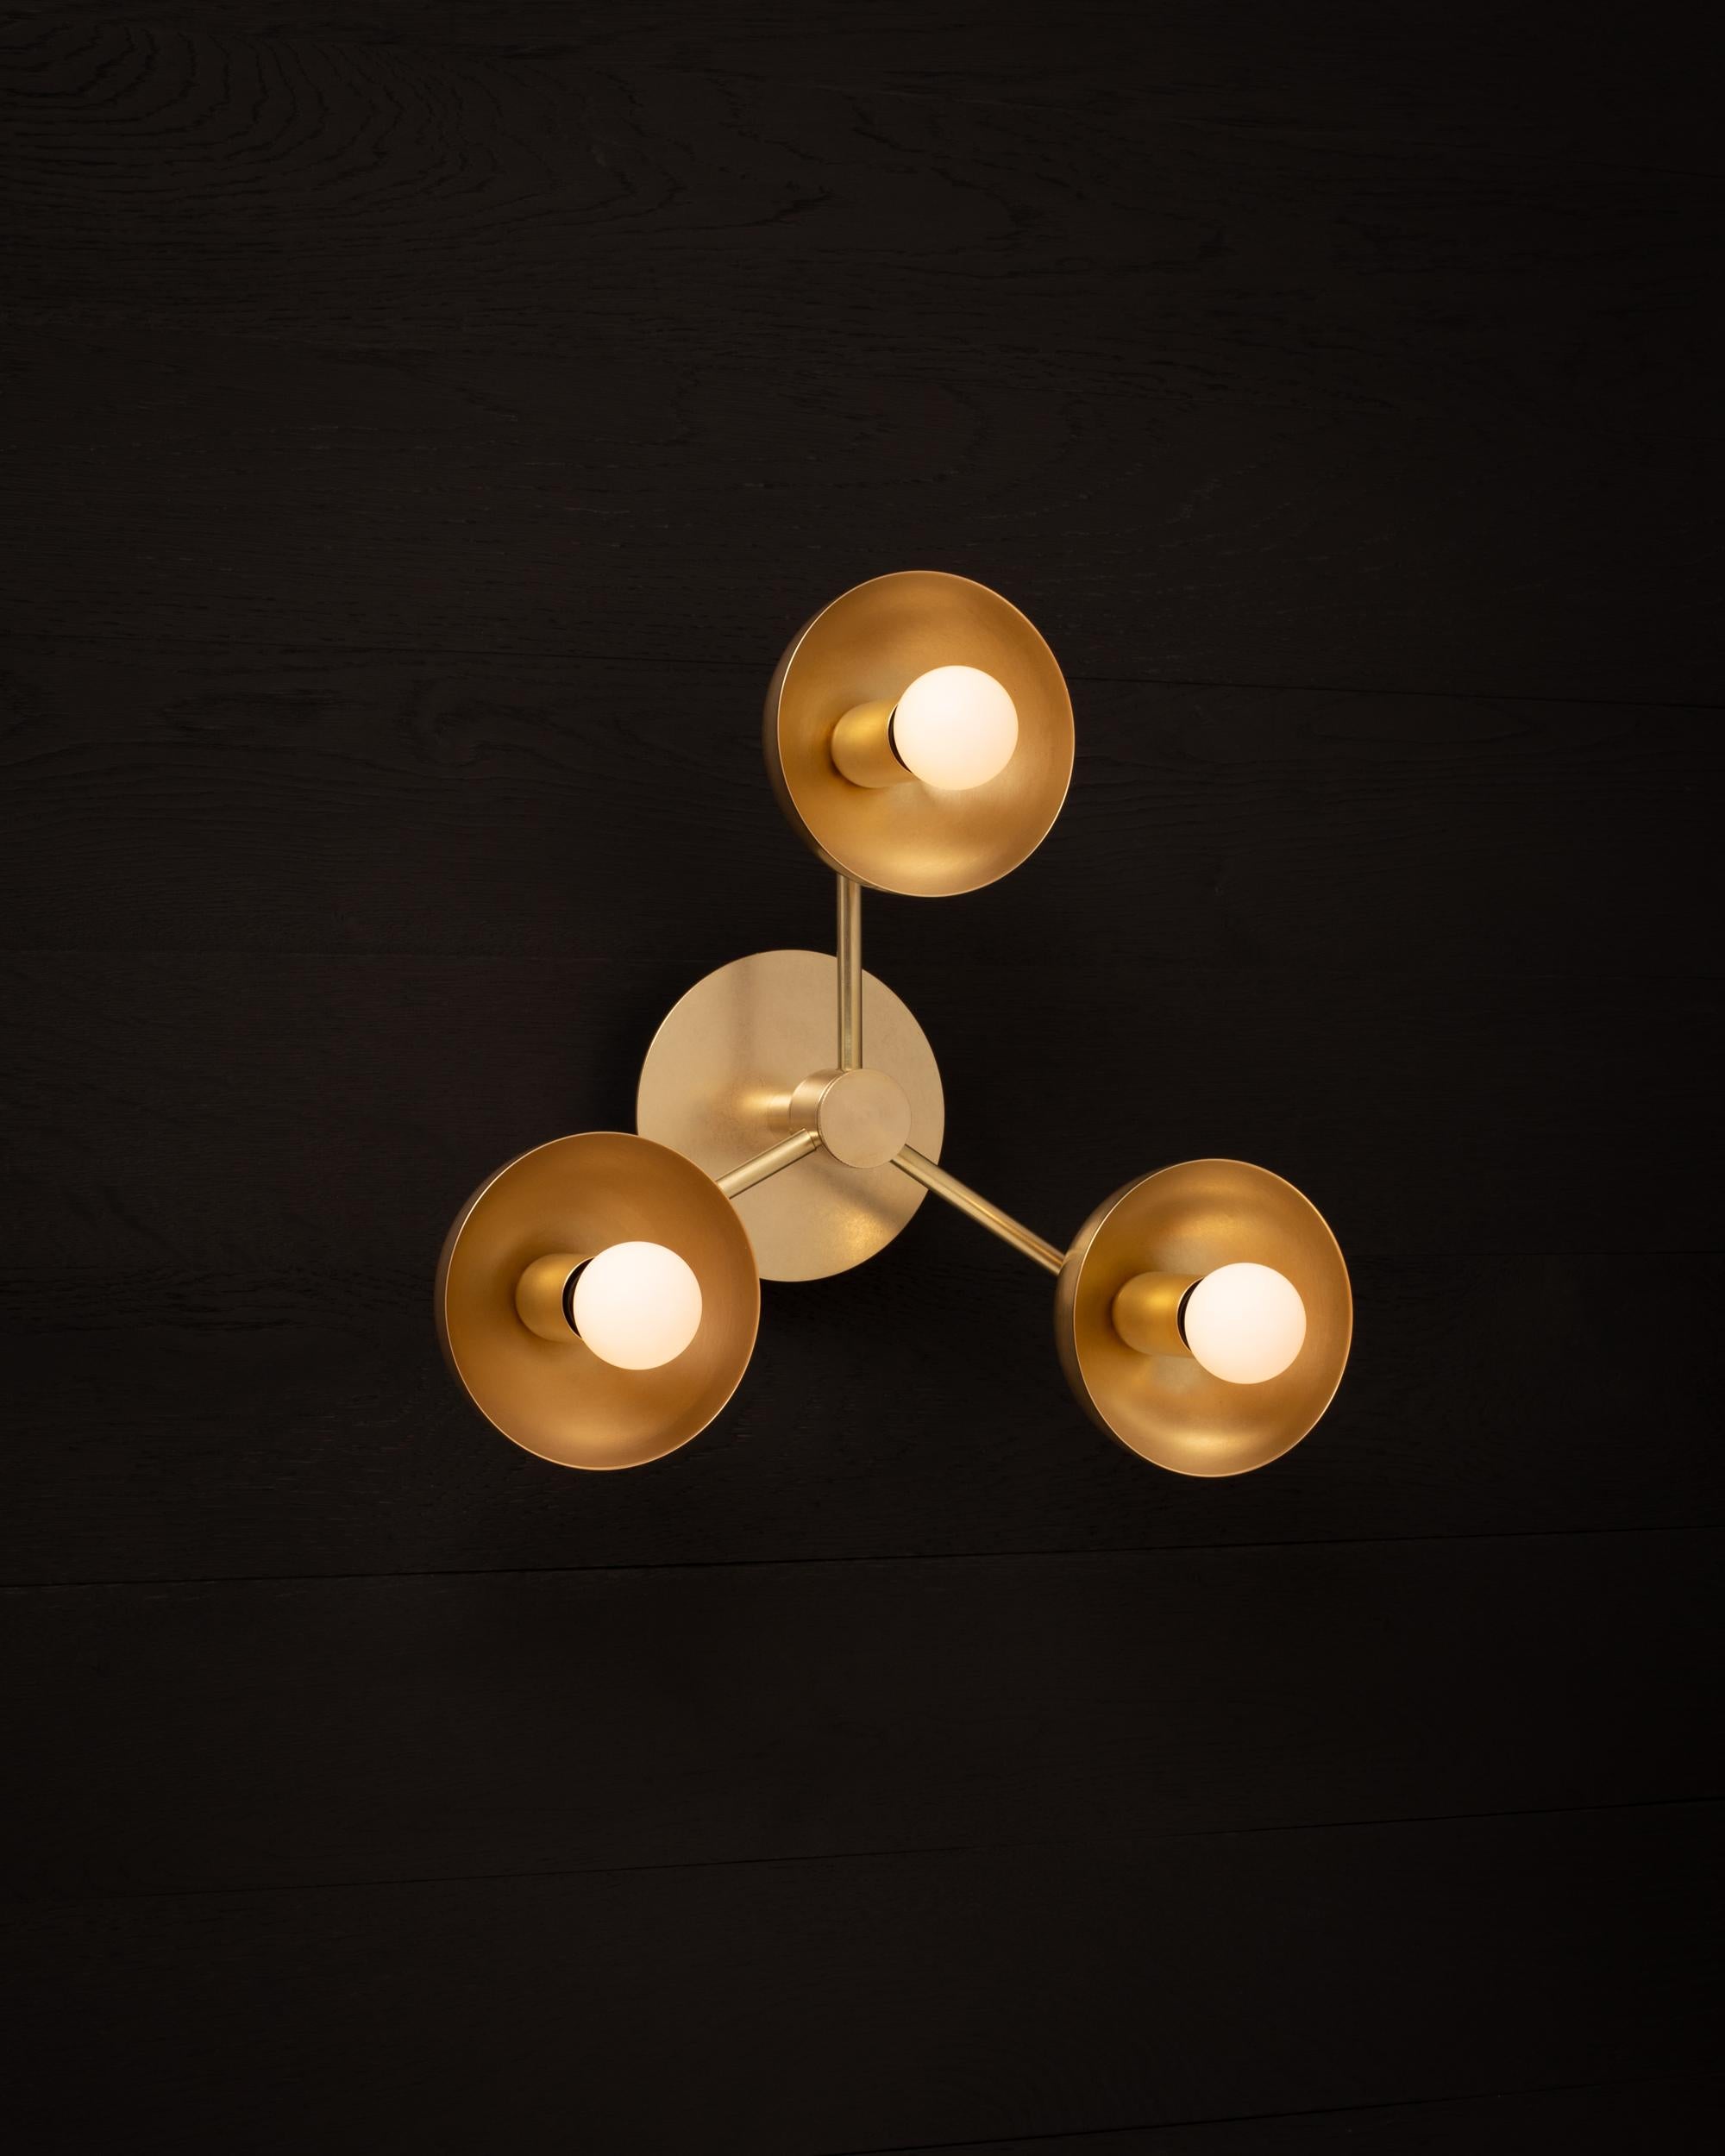 Triple Brass Dome Wall Sconce Tala Porcelain I, Lighting Fixture In New Condition In London, GB